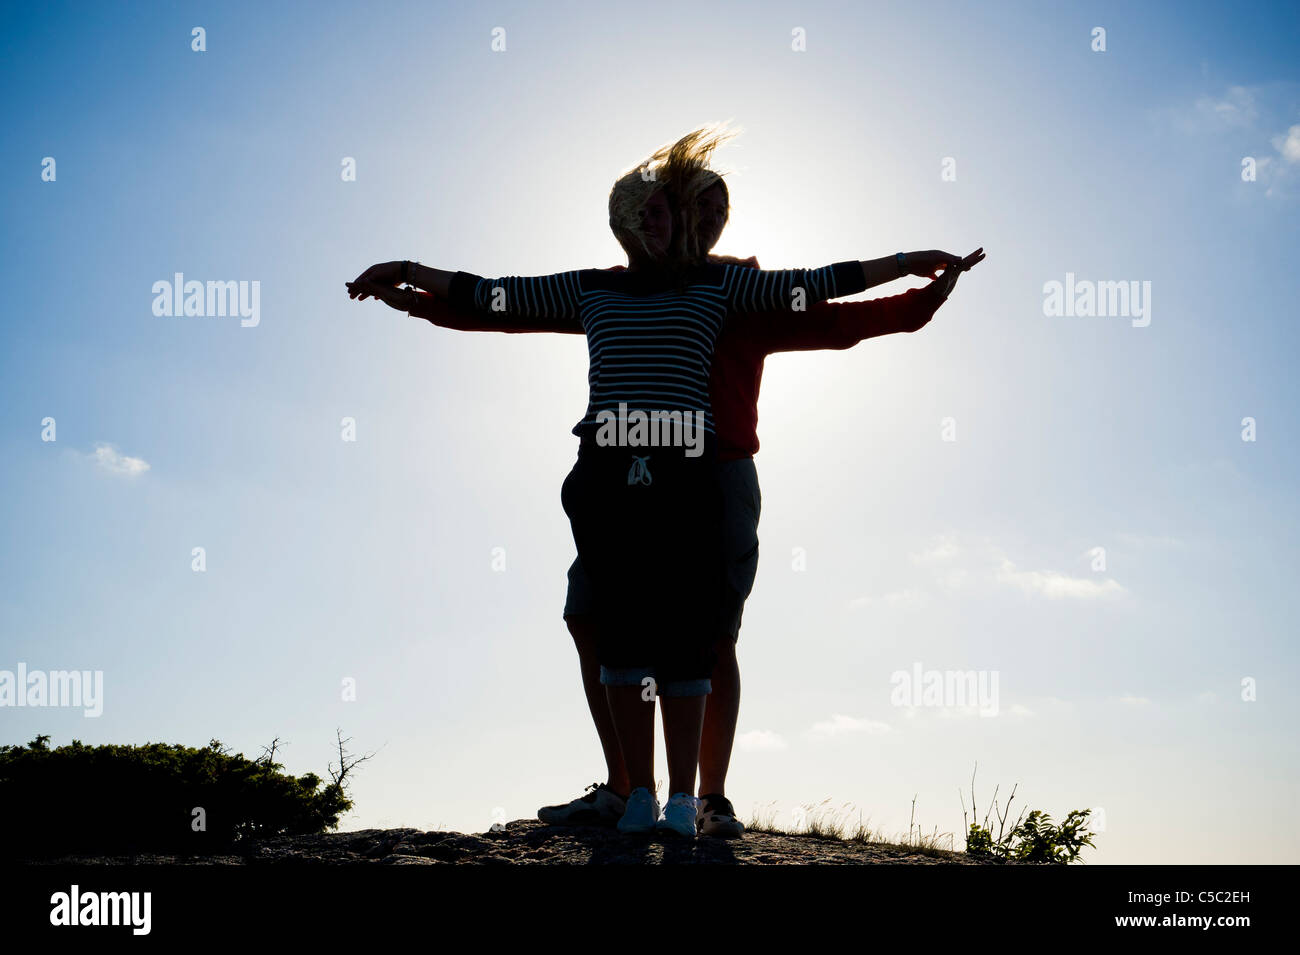 Silhouette couple with arms outstretched in backlight against clear sky Stock Photo